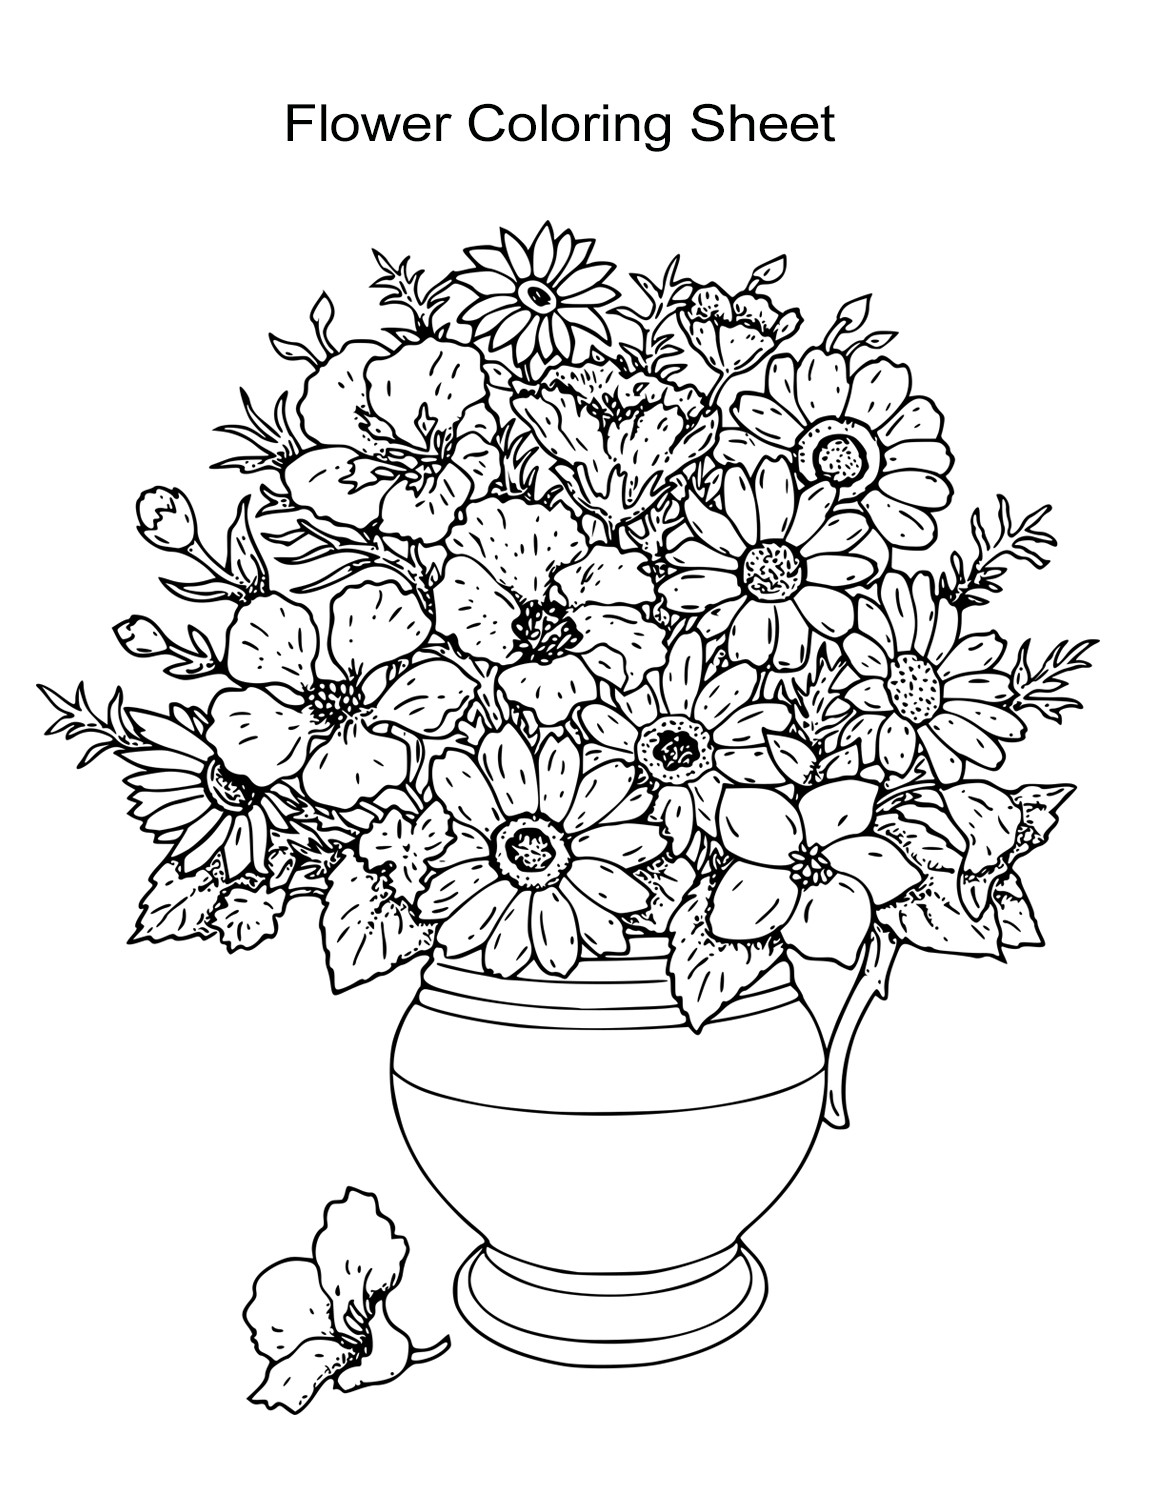 Flowers Coloring Pages For Girls
 10 Flower Coloring Sheets for Girls and Boys Free